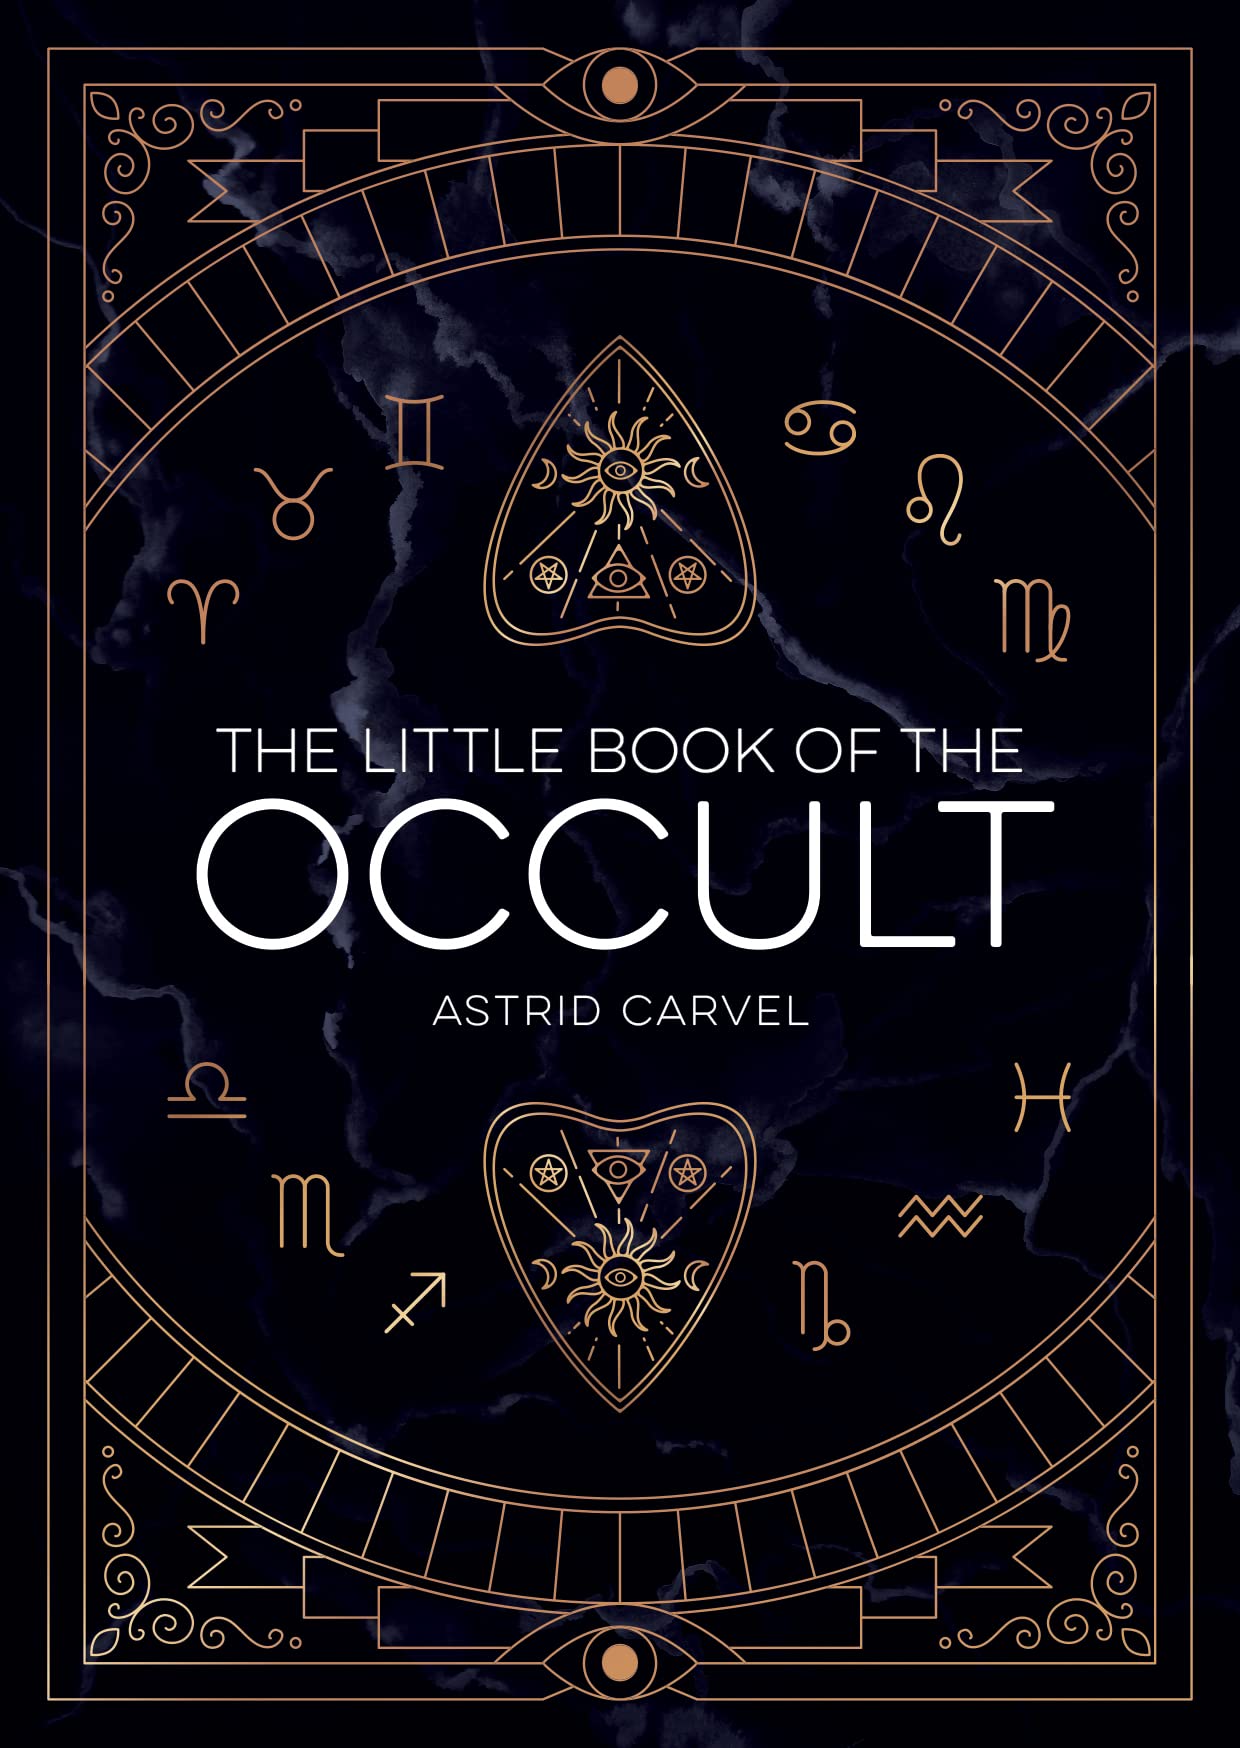 The Little Book of the Occult | Astrid Carvel